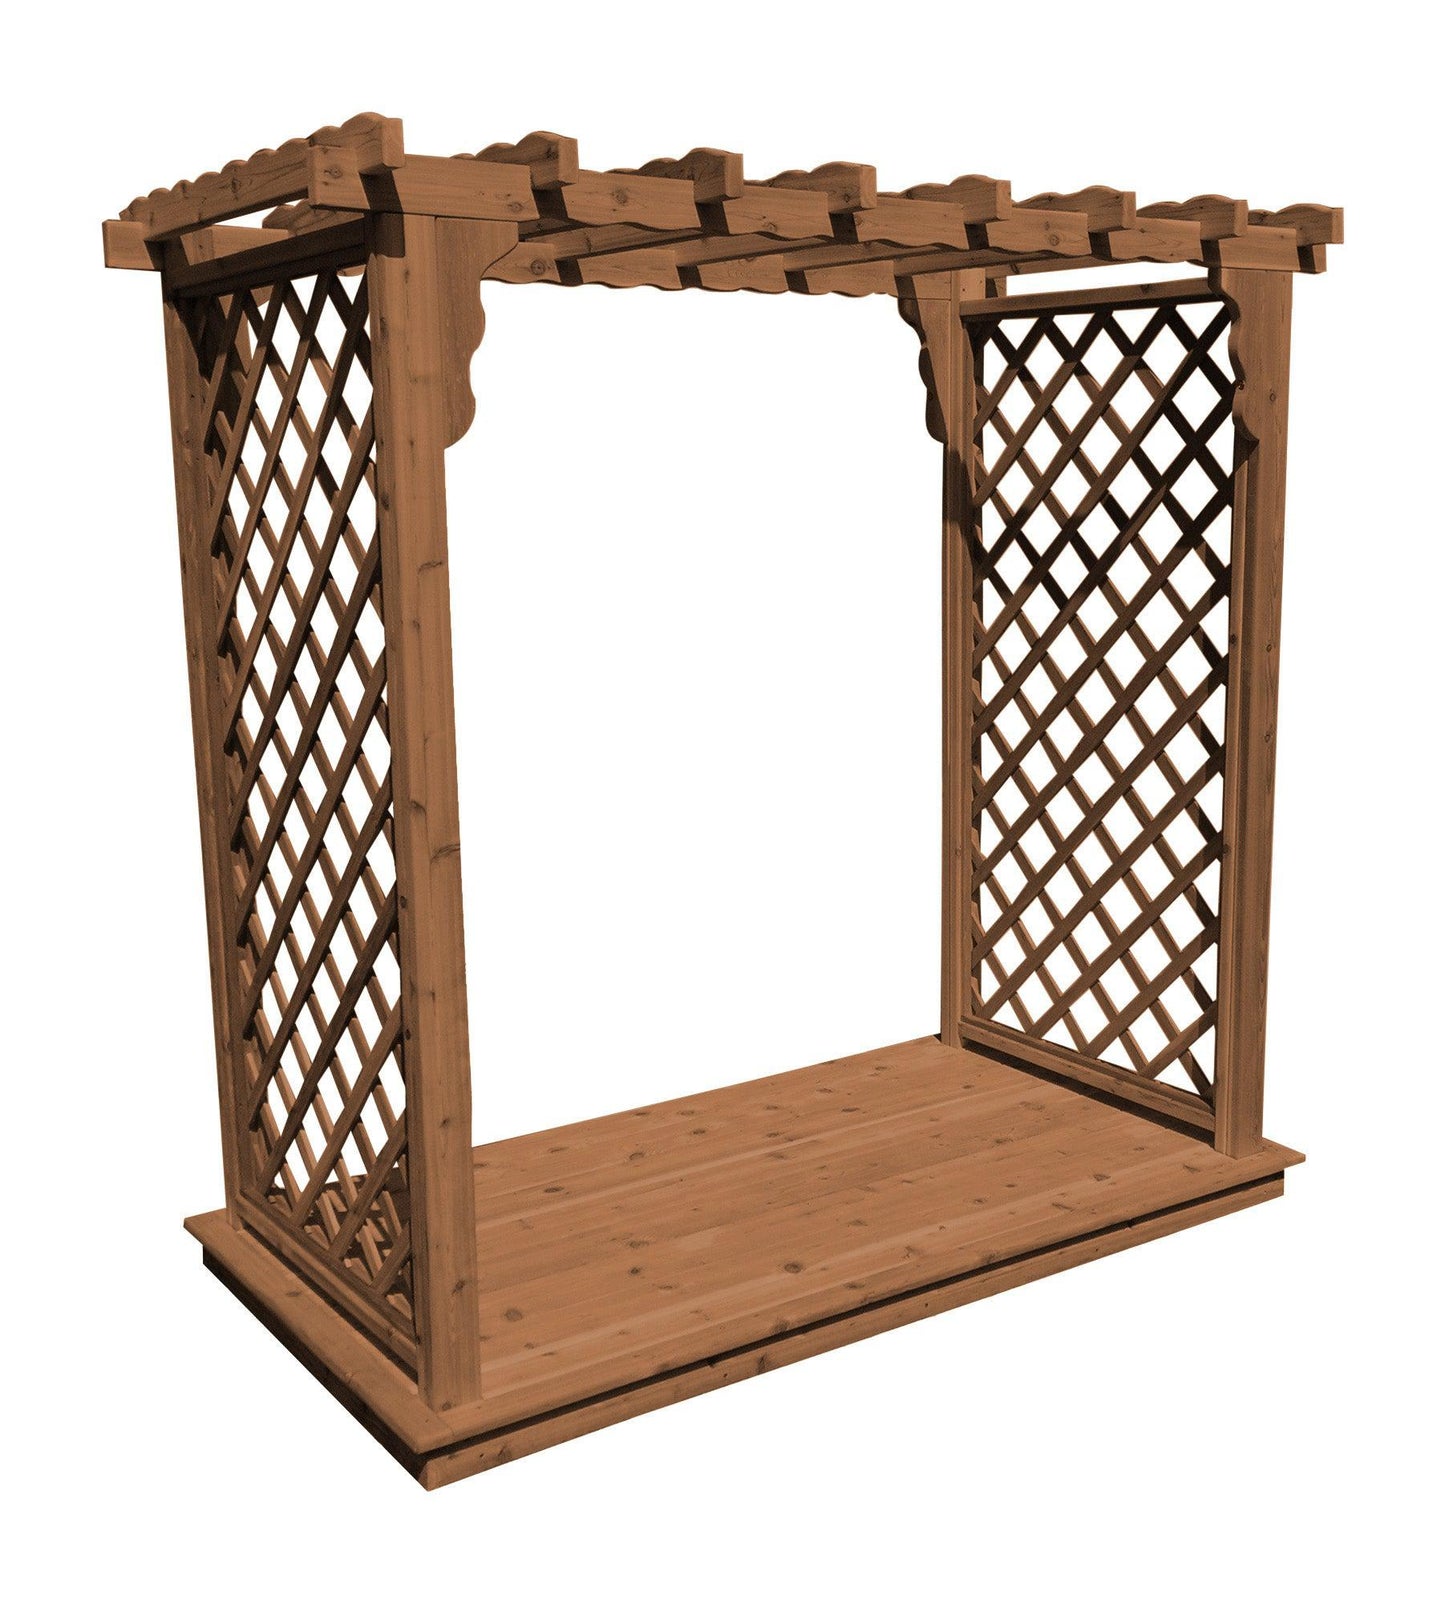 A&L Furniture Co. Western Red Cedar 5' Covington Arbor & Deck - LEAD TIME TO SHIP 4 WEEKS OR LESS